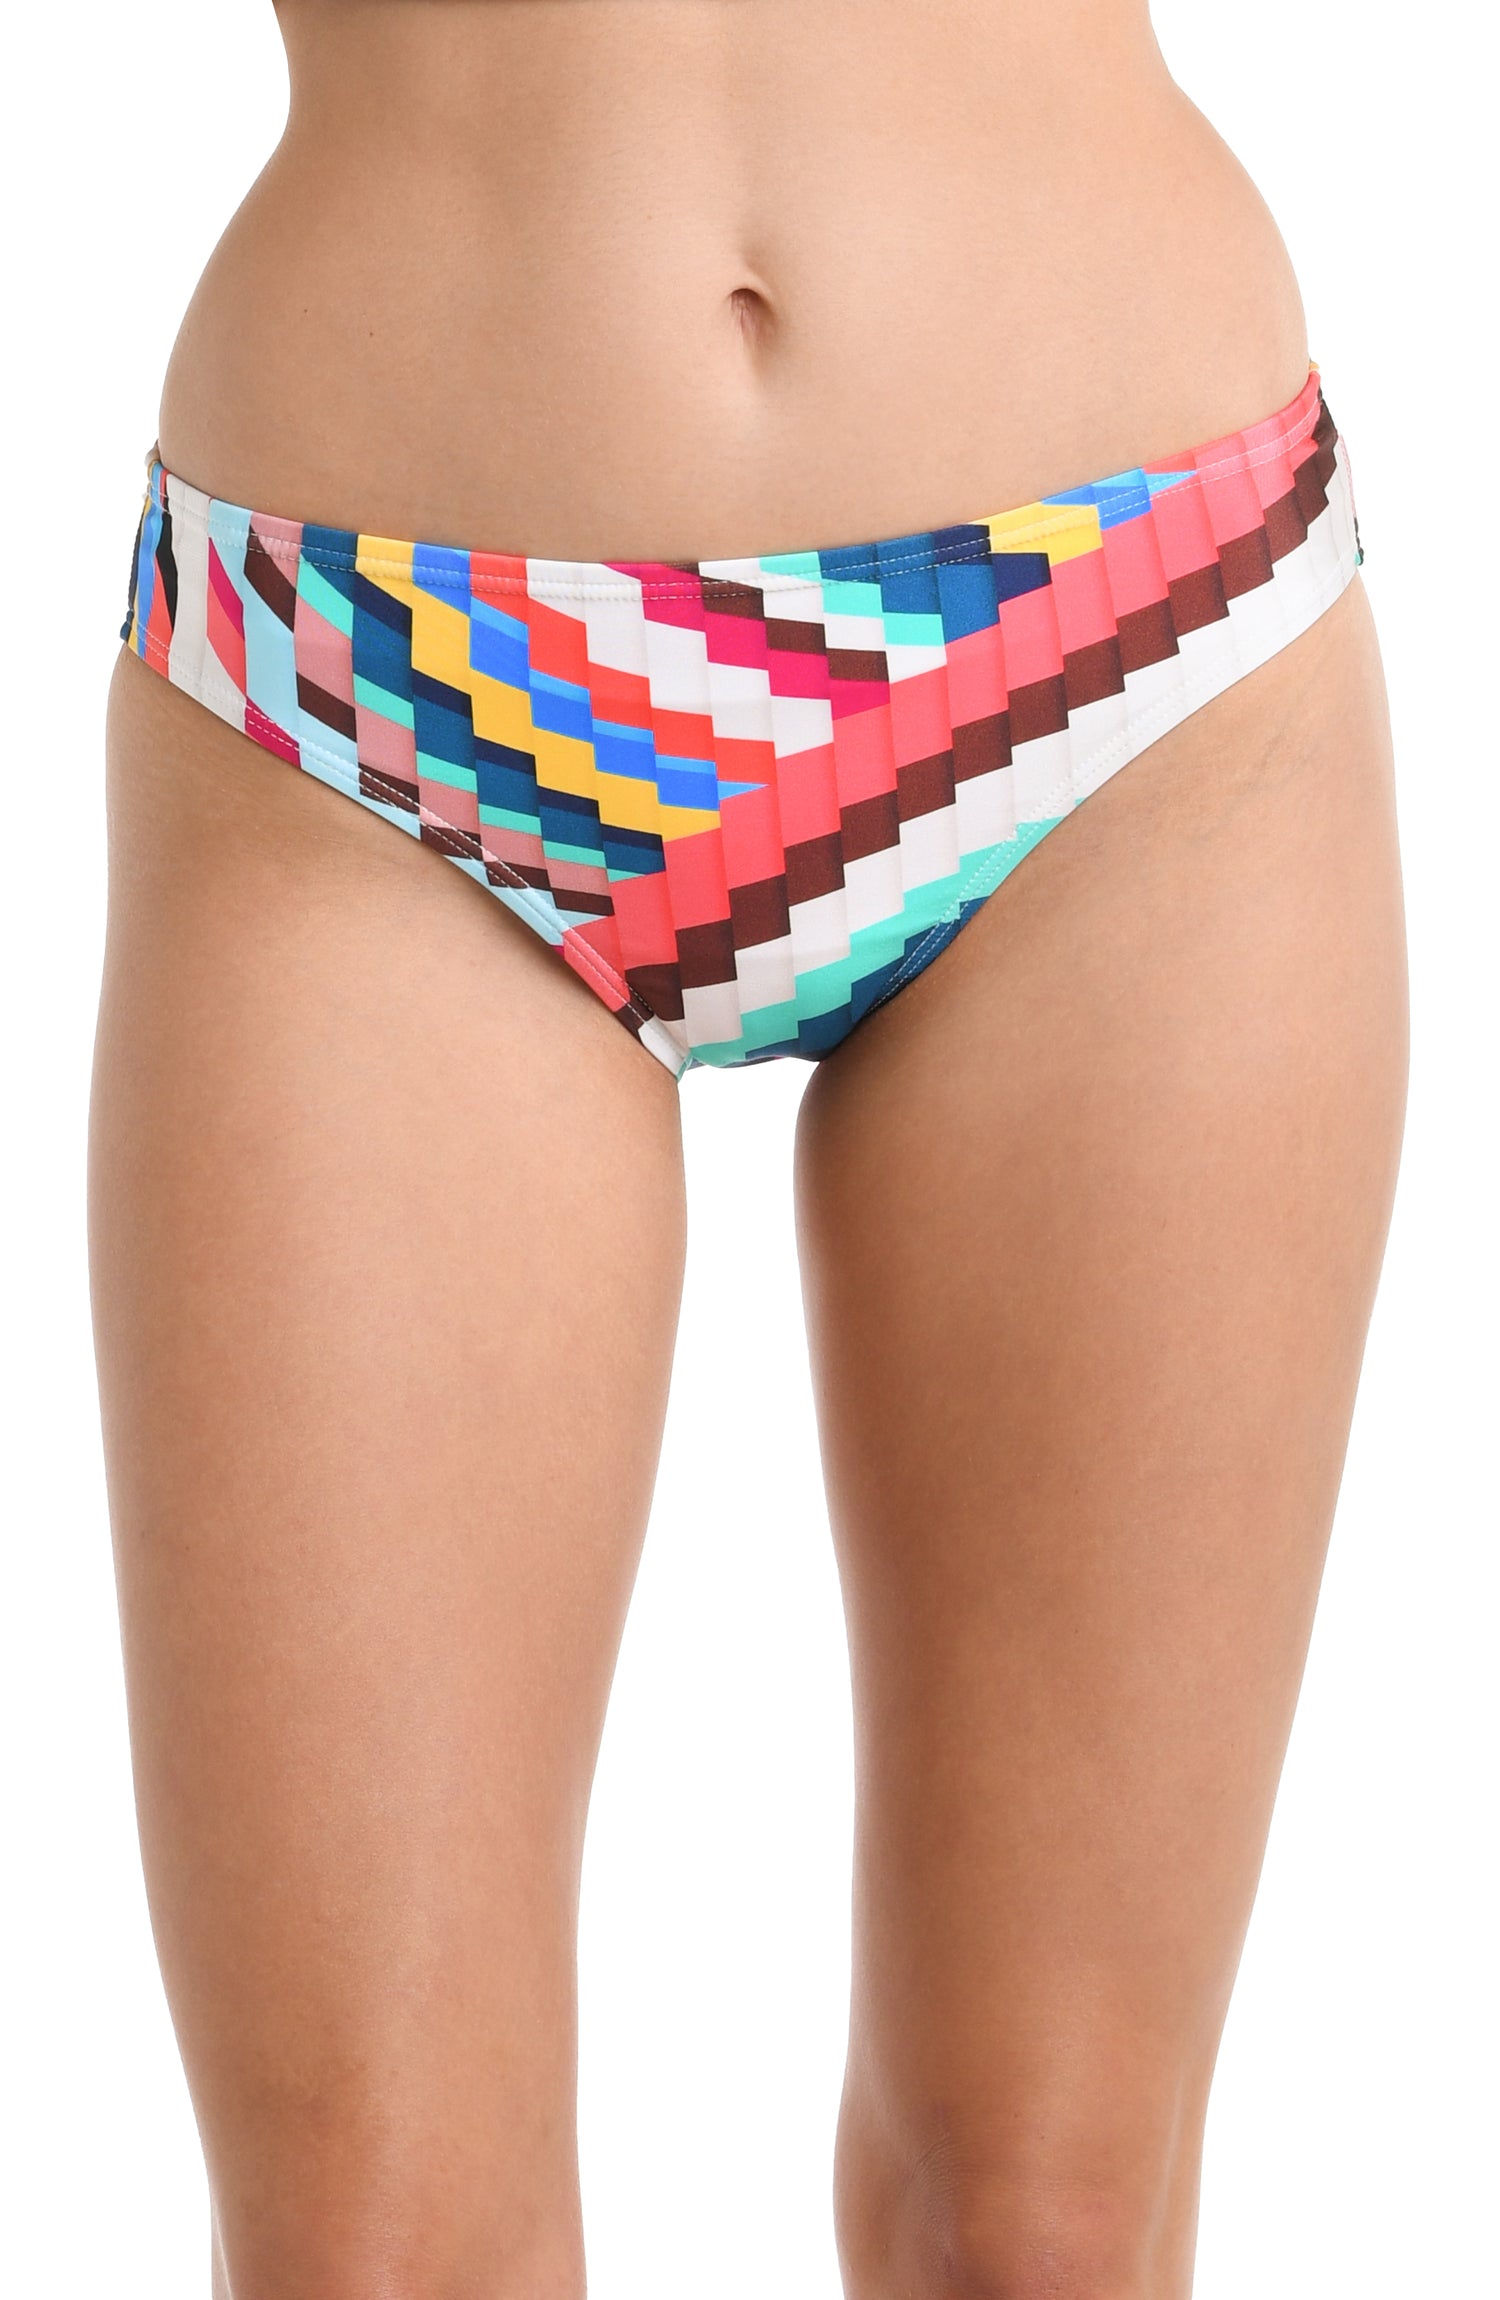 Model is wearing a vibrant multi-colored geometric printed  Hipster Bottom